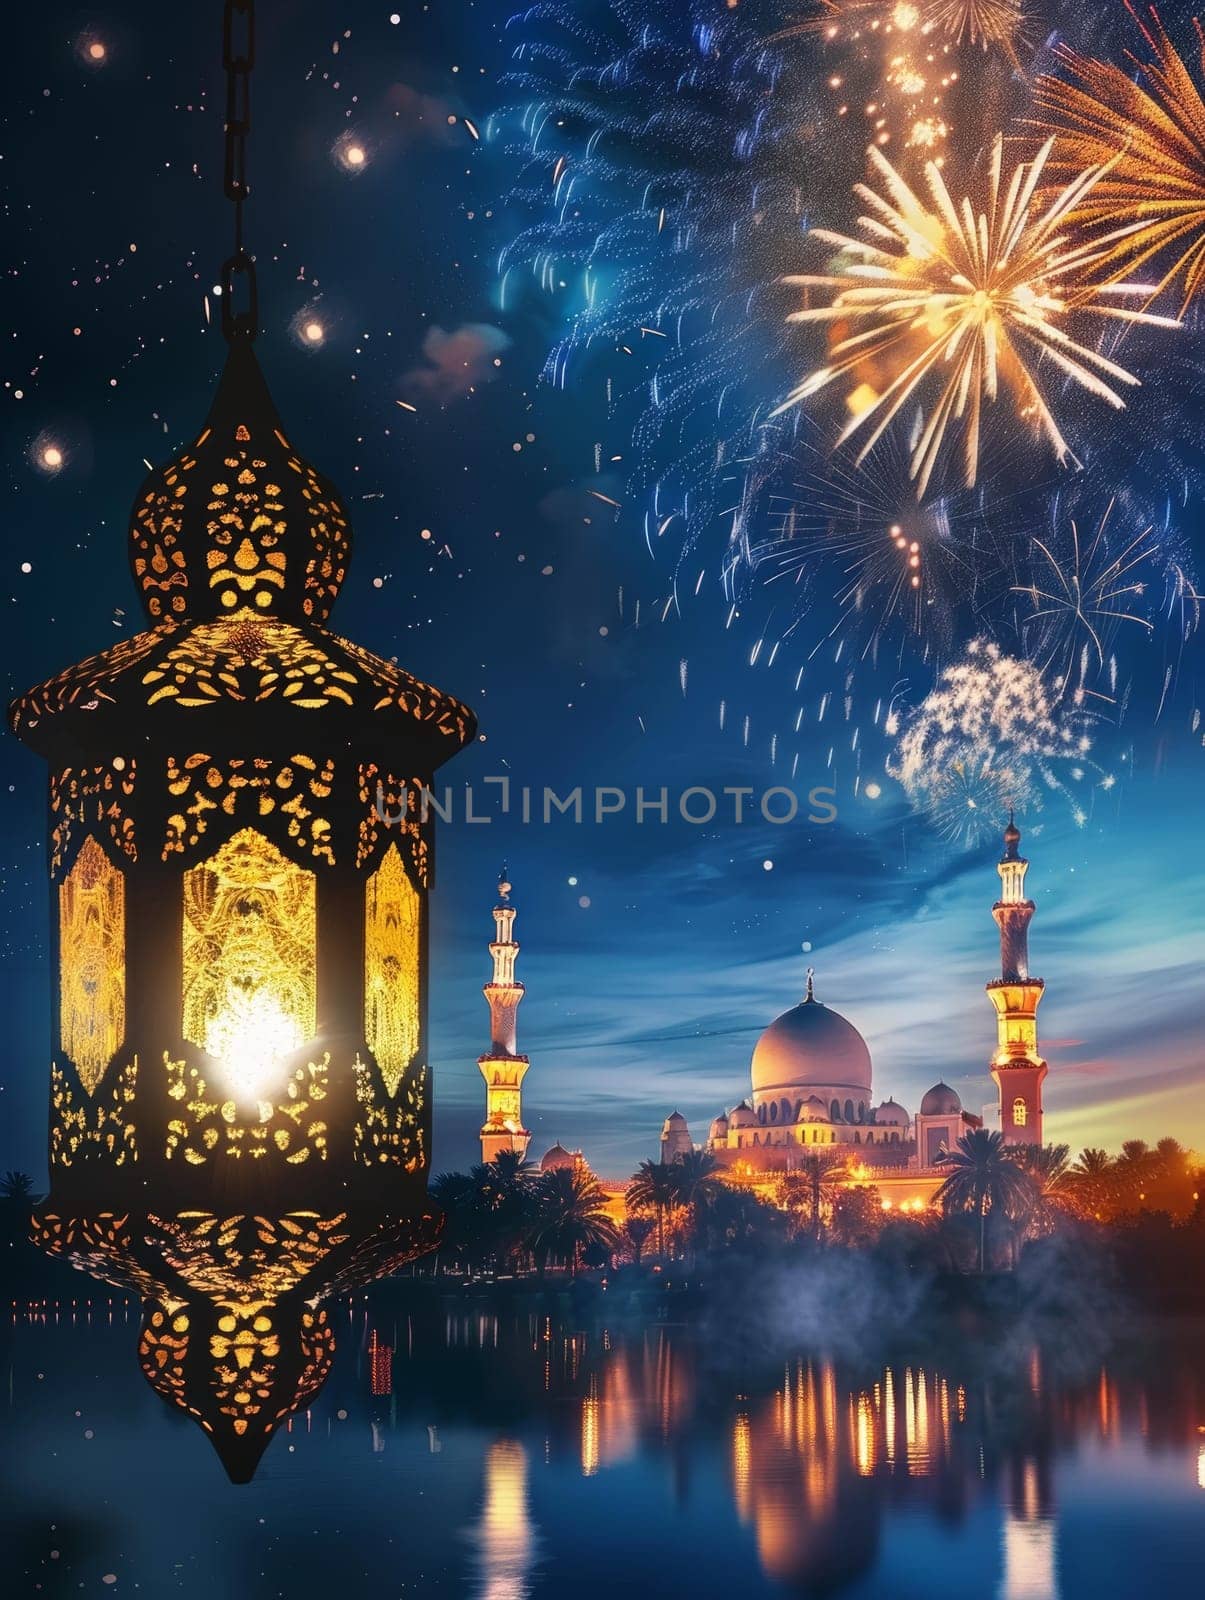 An intricately patterned lantern hangs above a serene lakeside view, highlighting a majestic mosque amidst fireworks